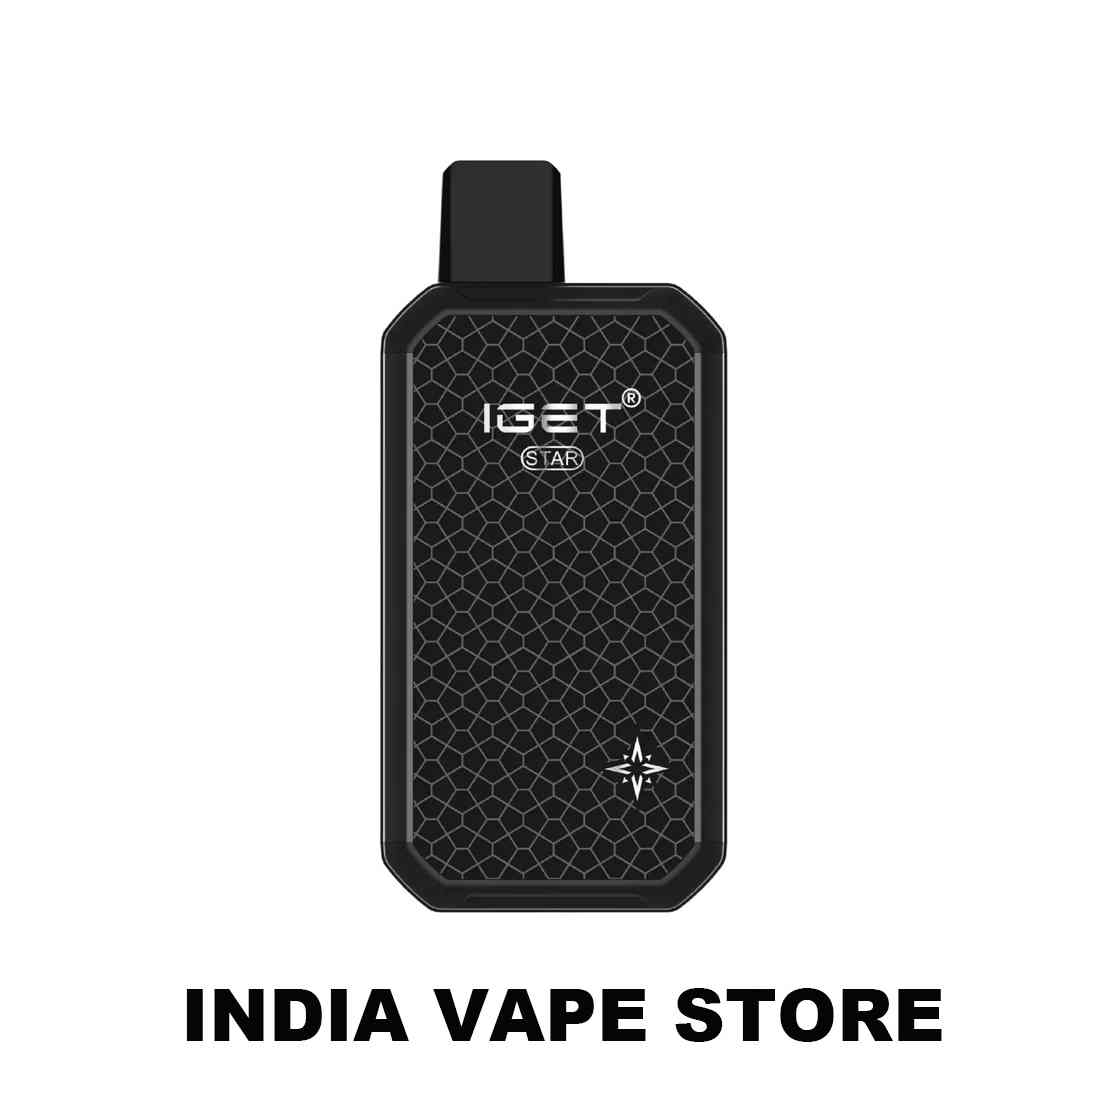 IGET STAR L7000 DISPOSABLE VAPE - STRAWBERRY WATERMELON ICE